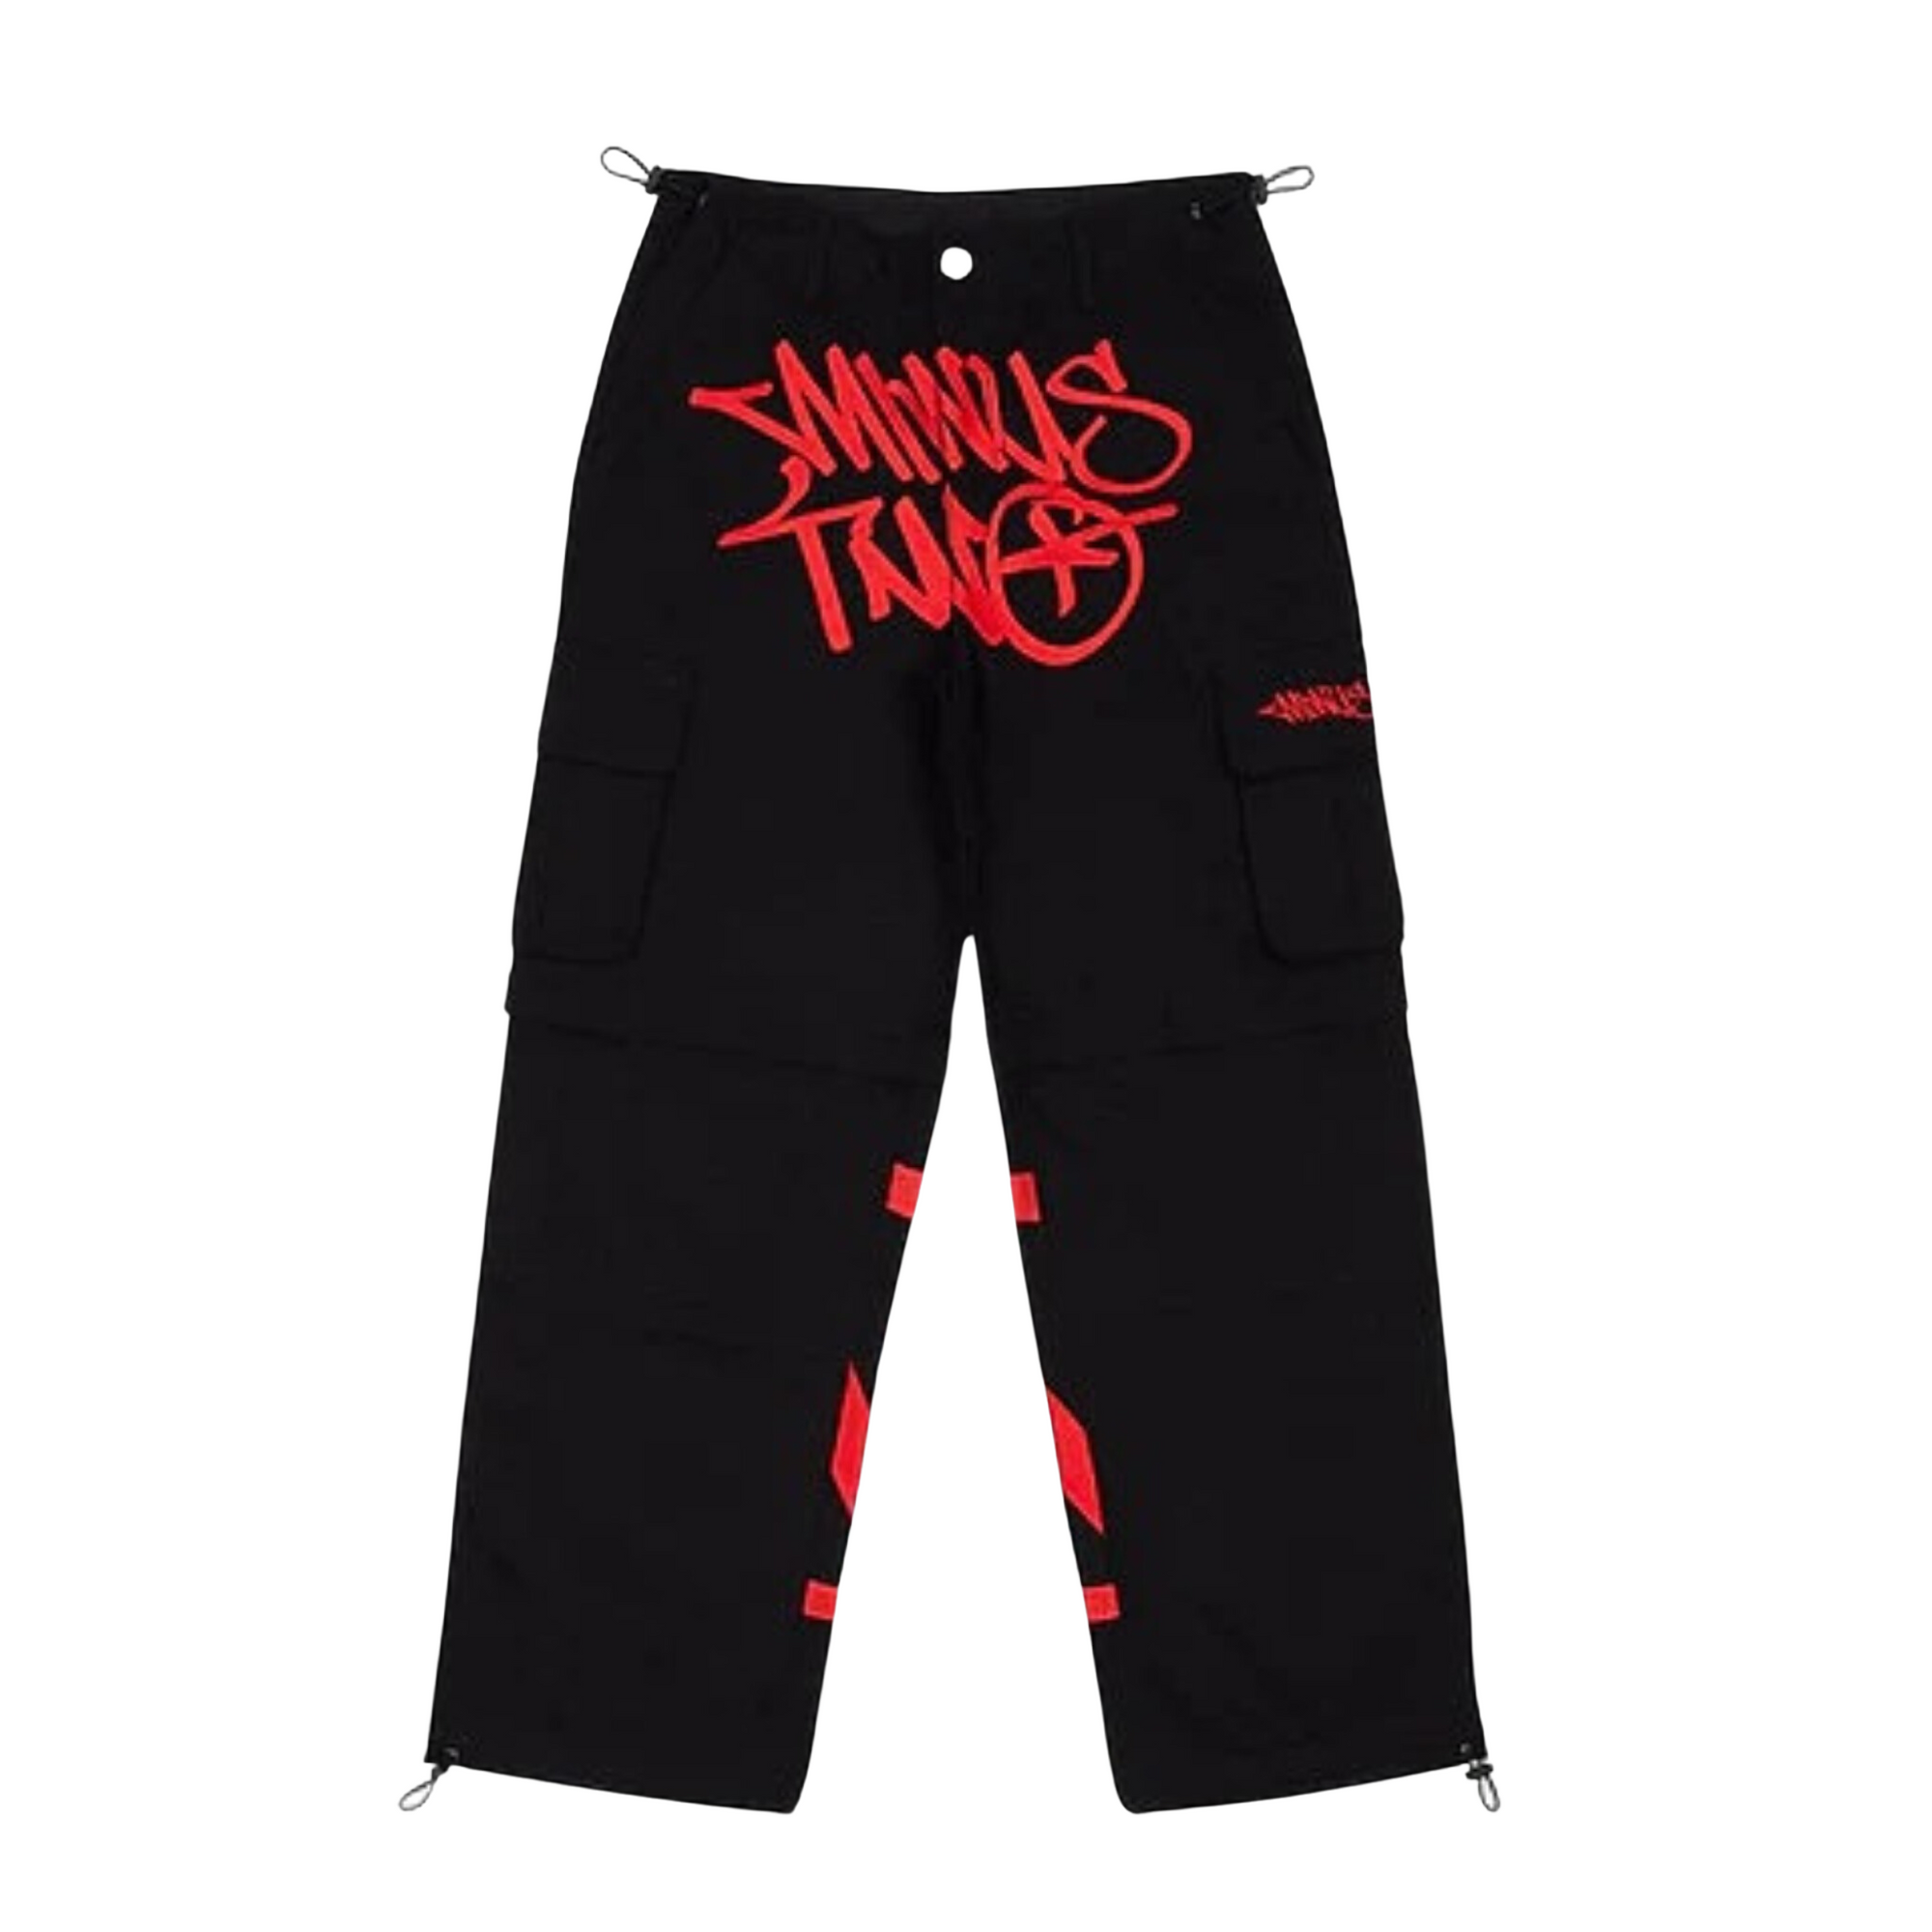 Cargo M2 Black and Red